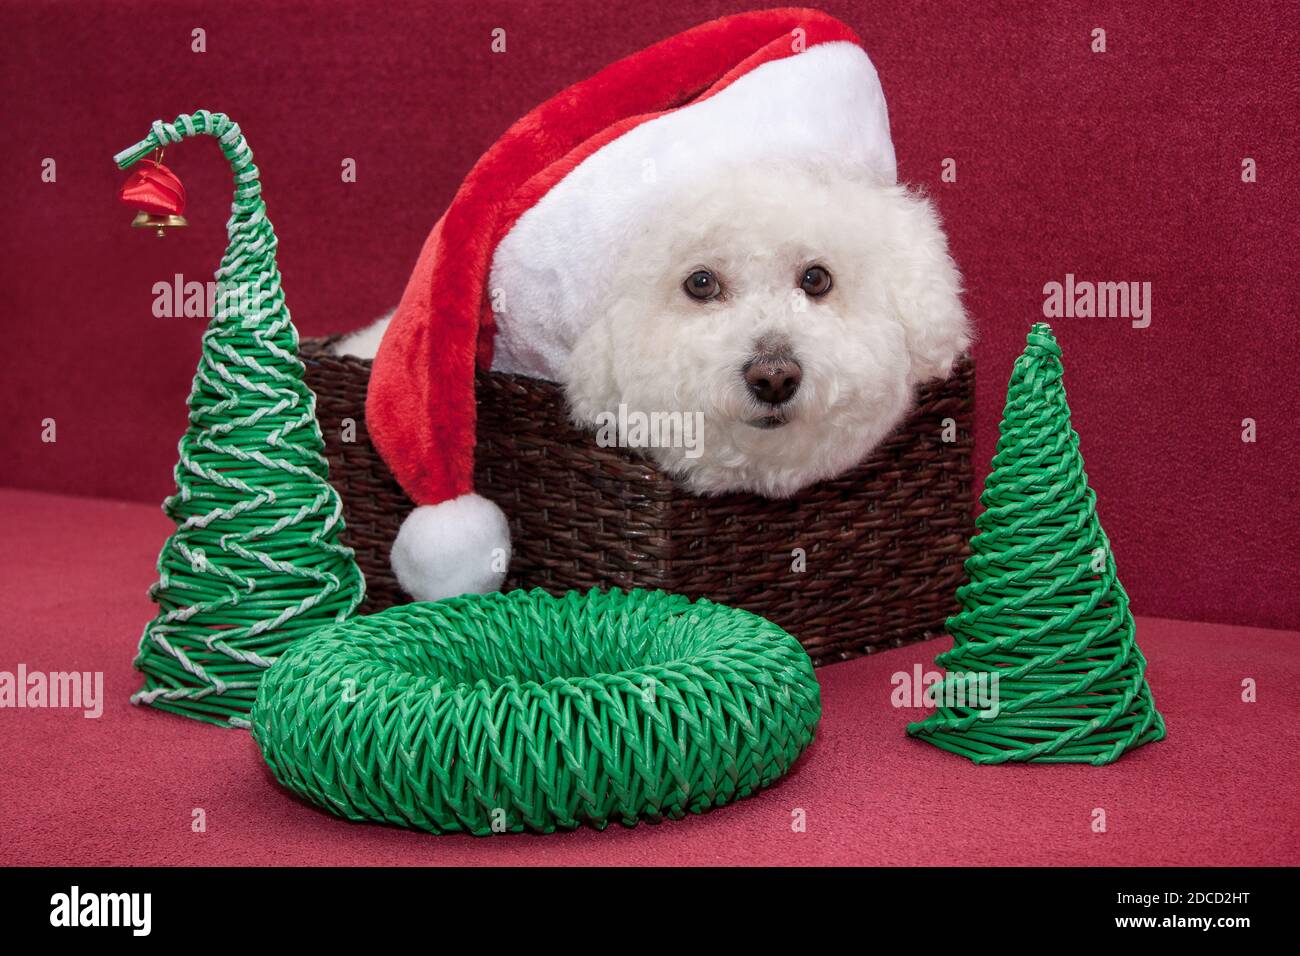 Cute bichon frise in santa claus hat is sitting in a wicker basket. Pet animals. Stock Photo